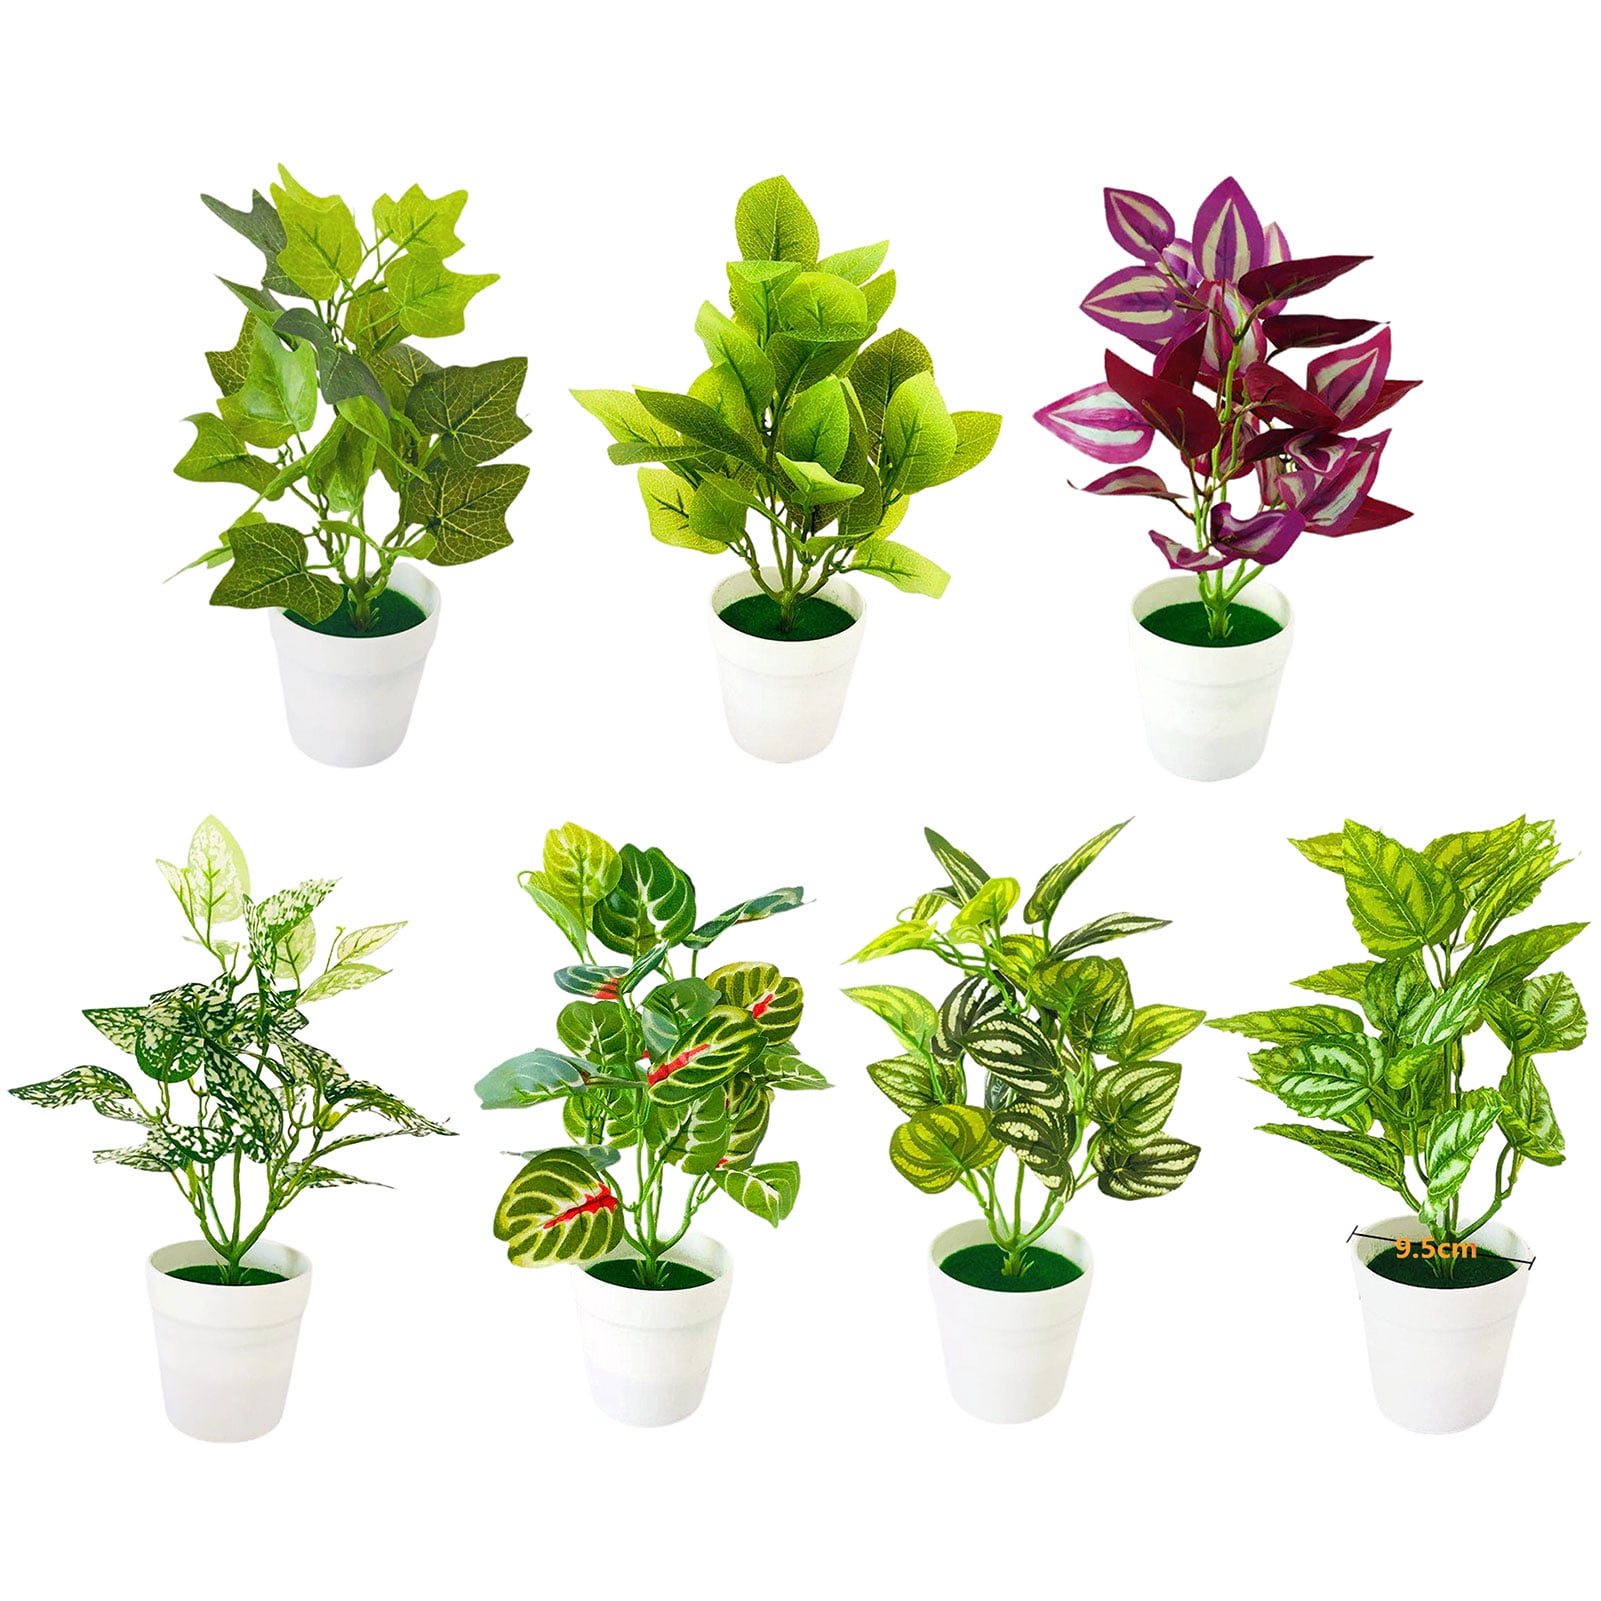 Details about   Wall Hanging Flower Plant Pot Planter Holder Indoor Outdoor Large Size UK NEW C 